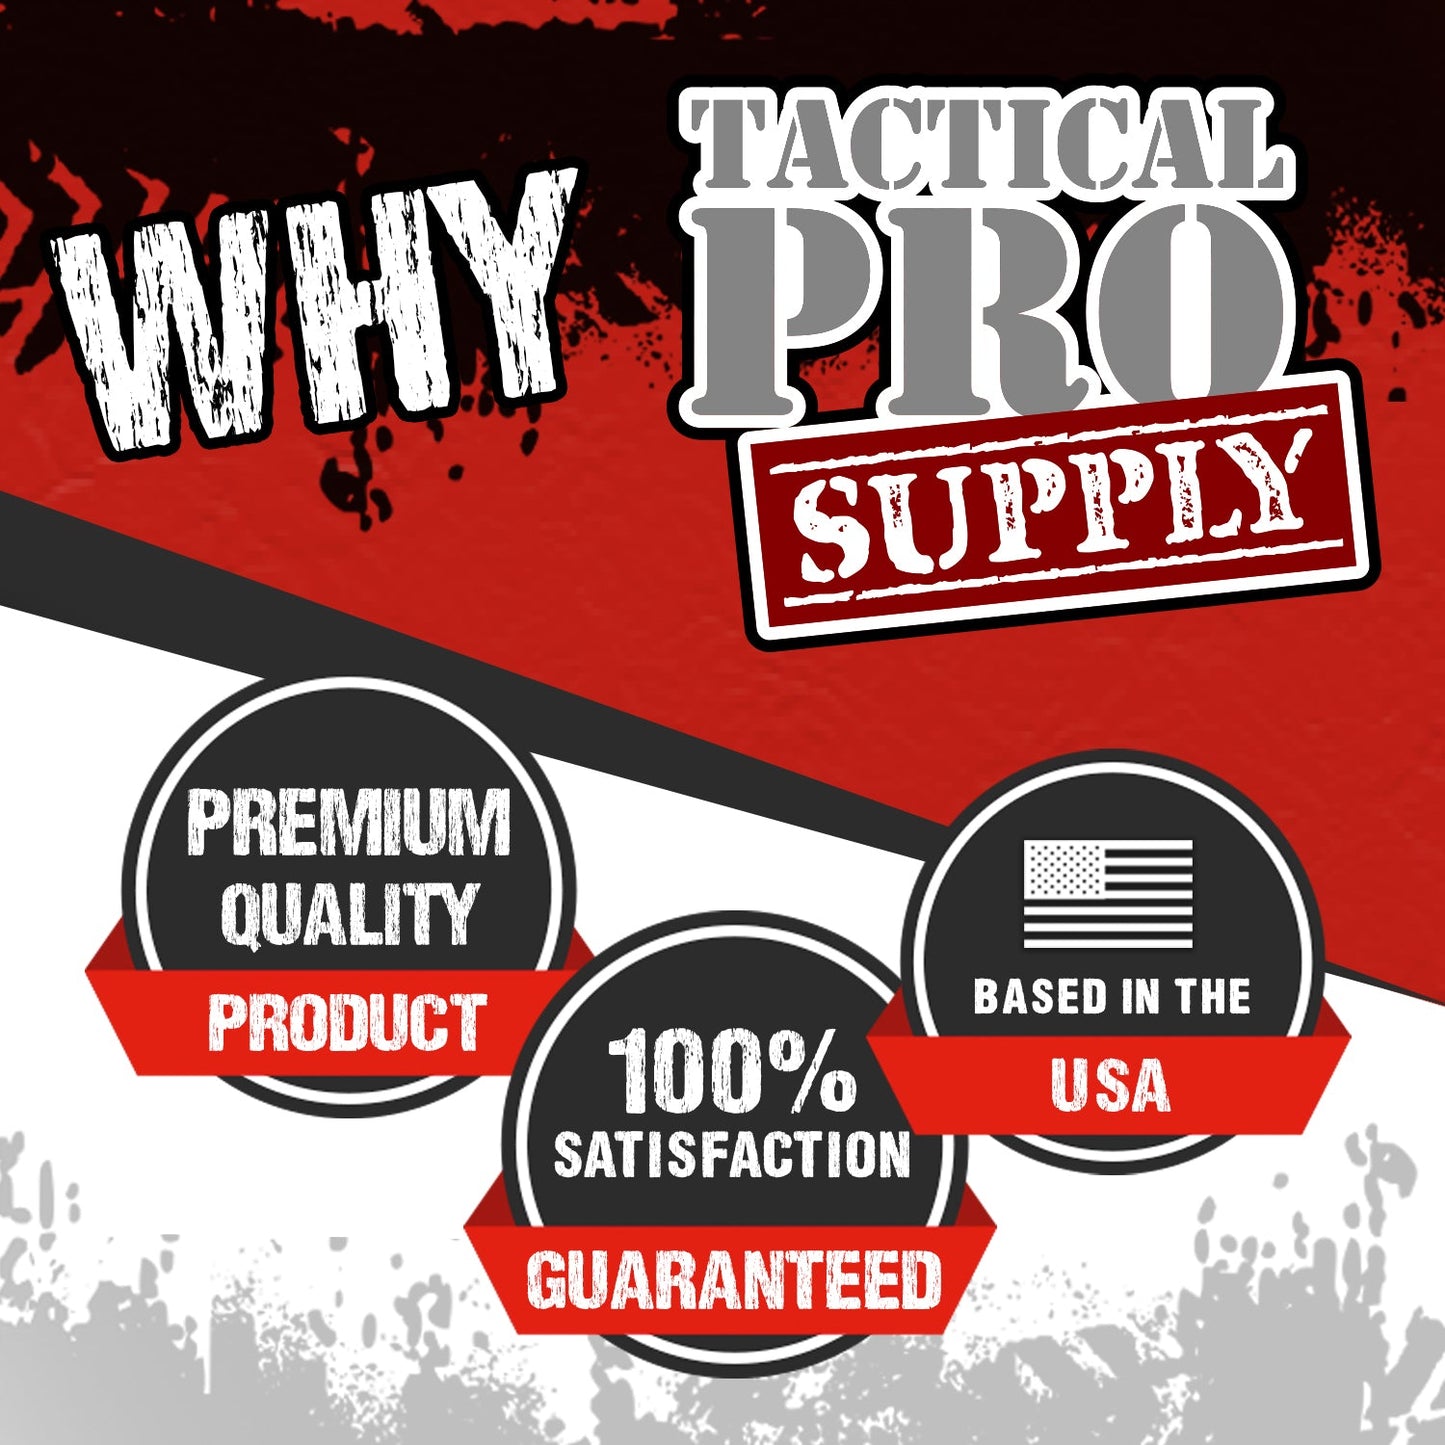 Stole My Heart - Tactical Pro Supply, LLC